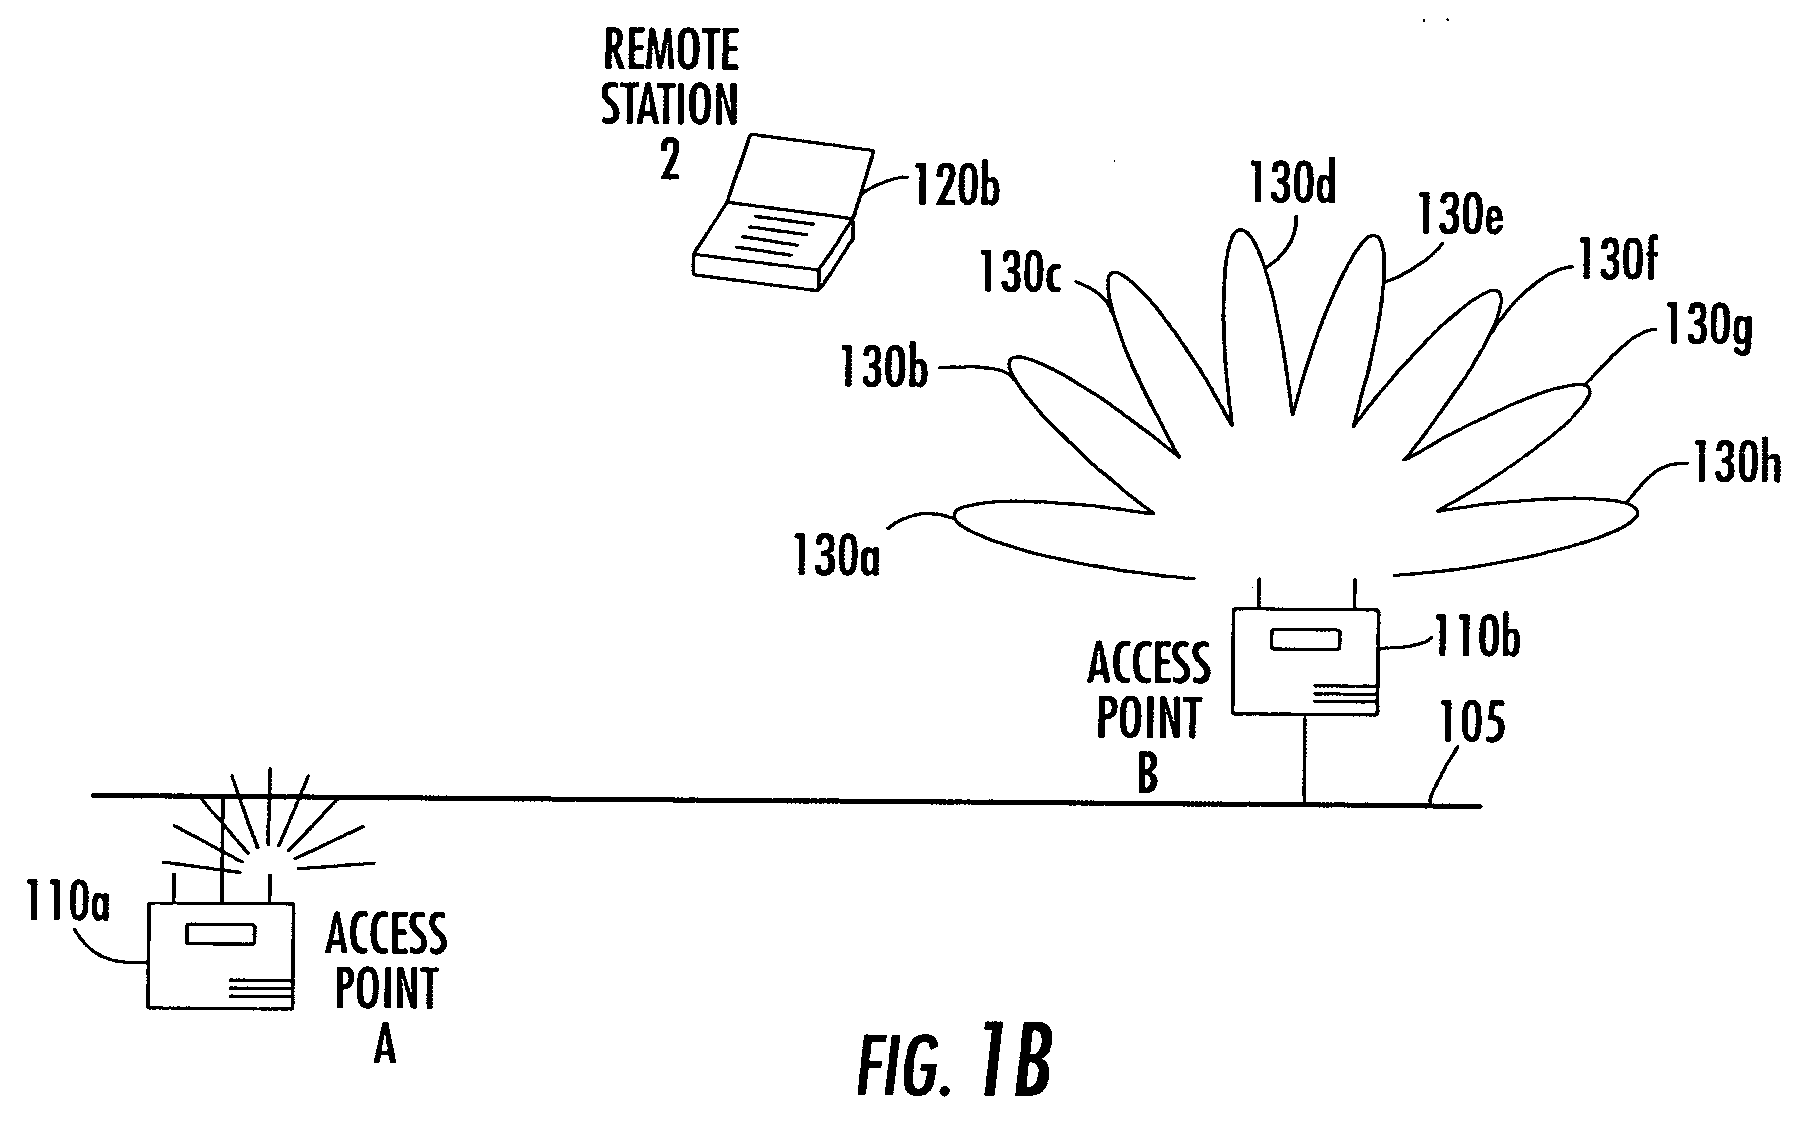 Antenna steering and hidden node recognition for an access point